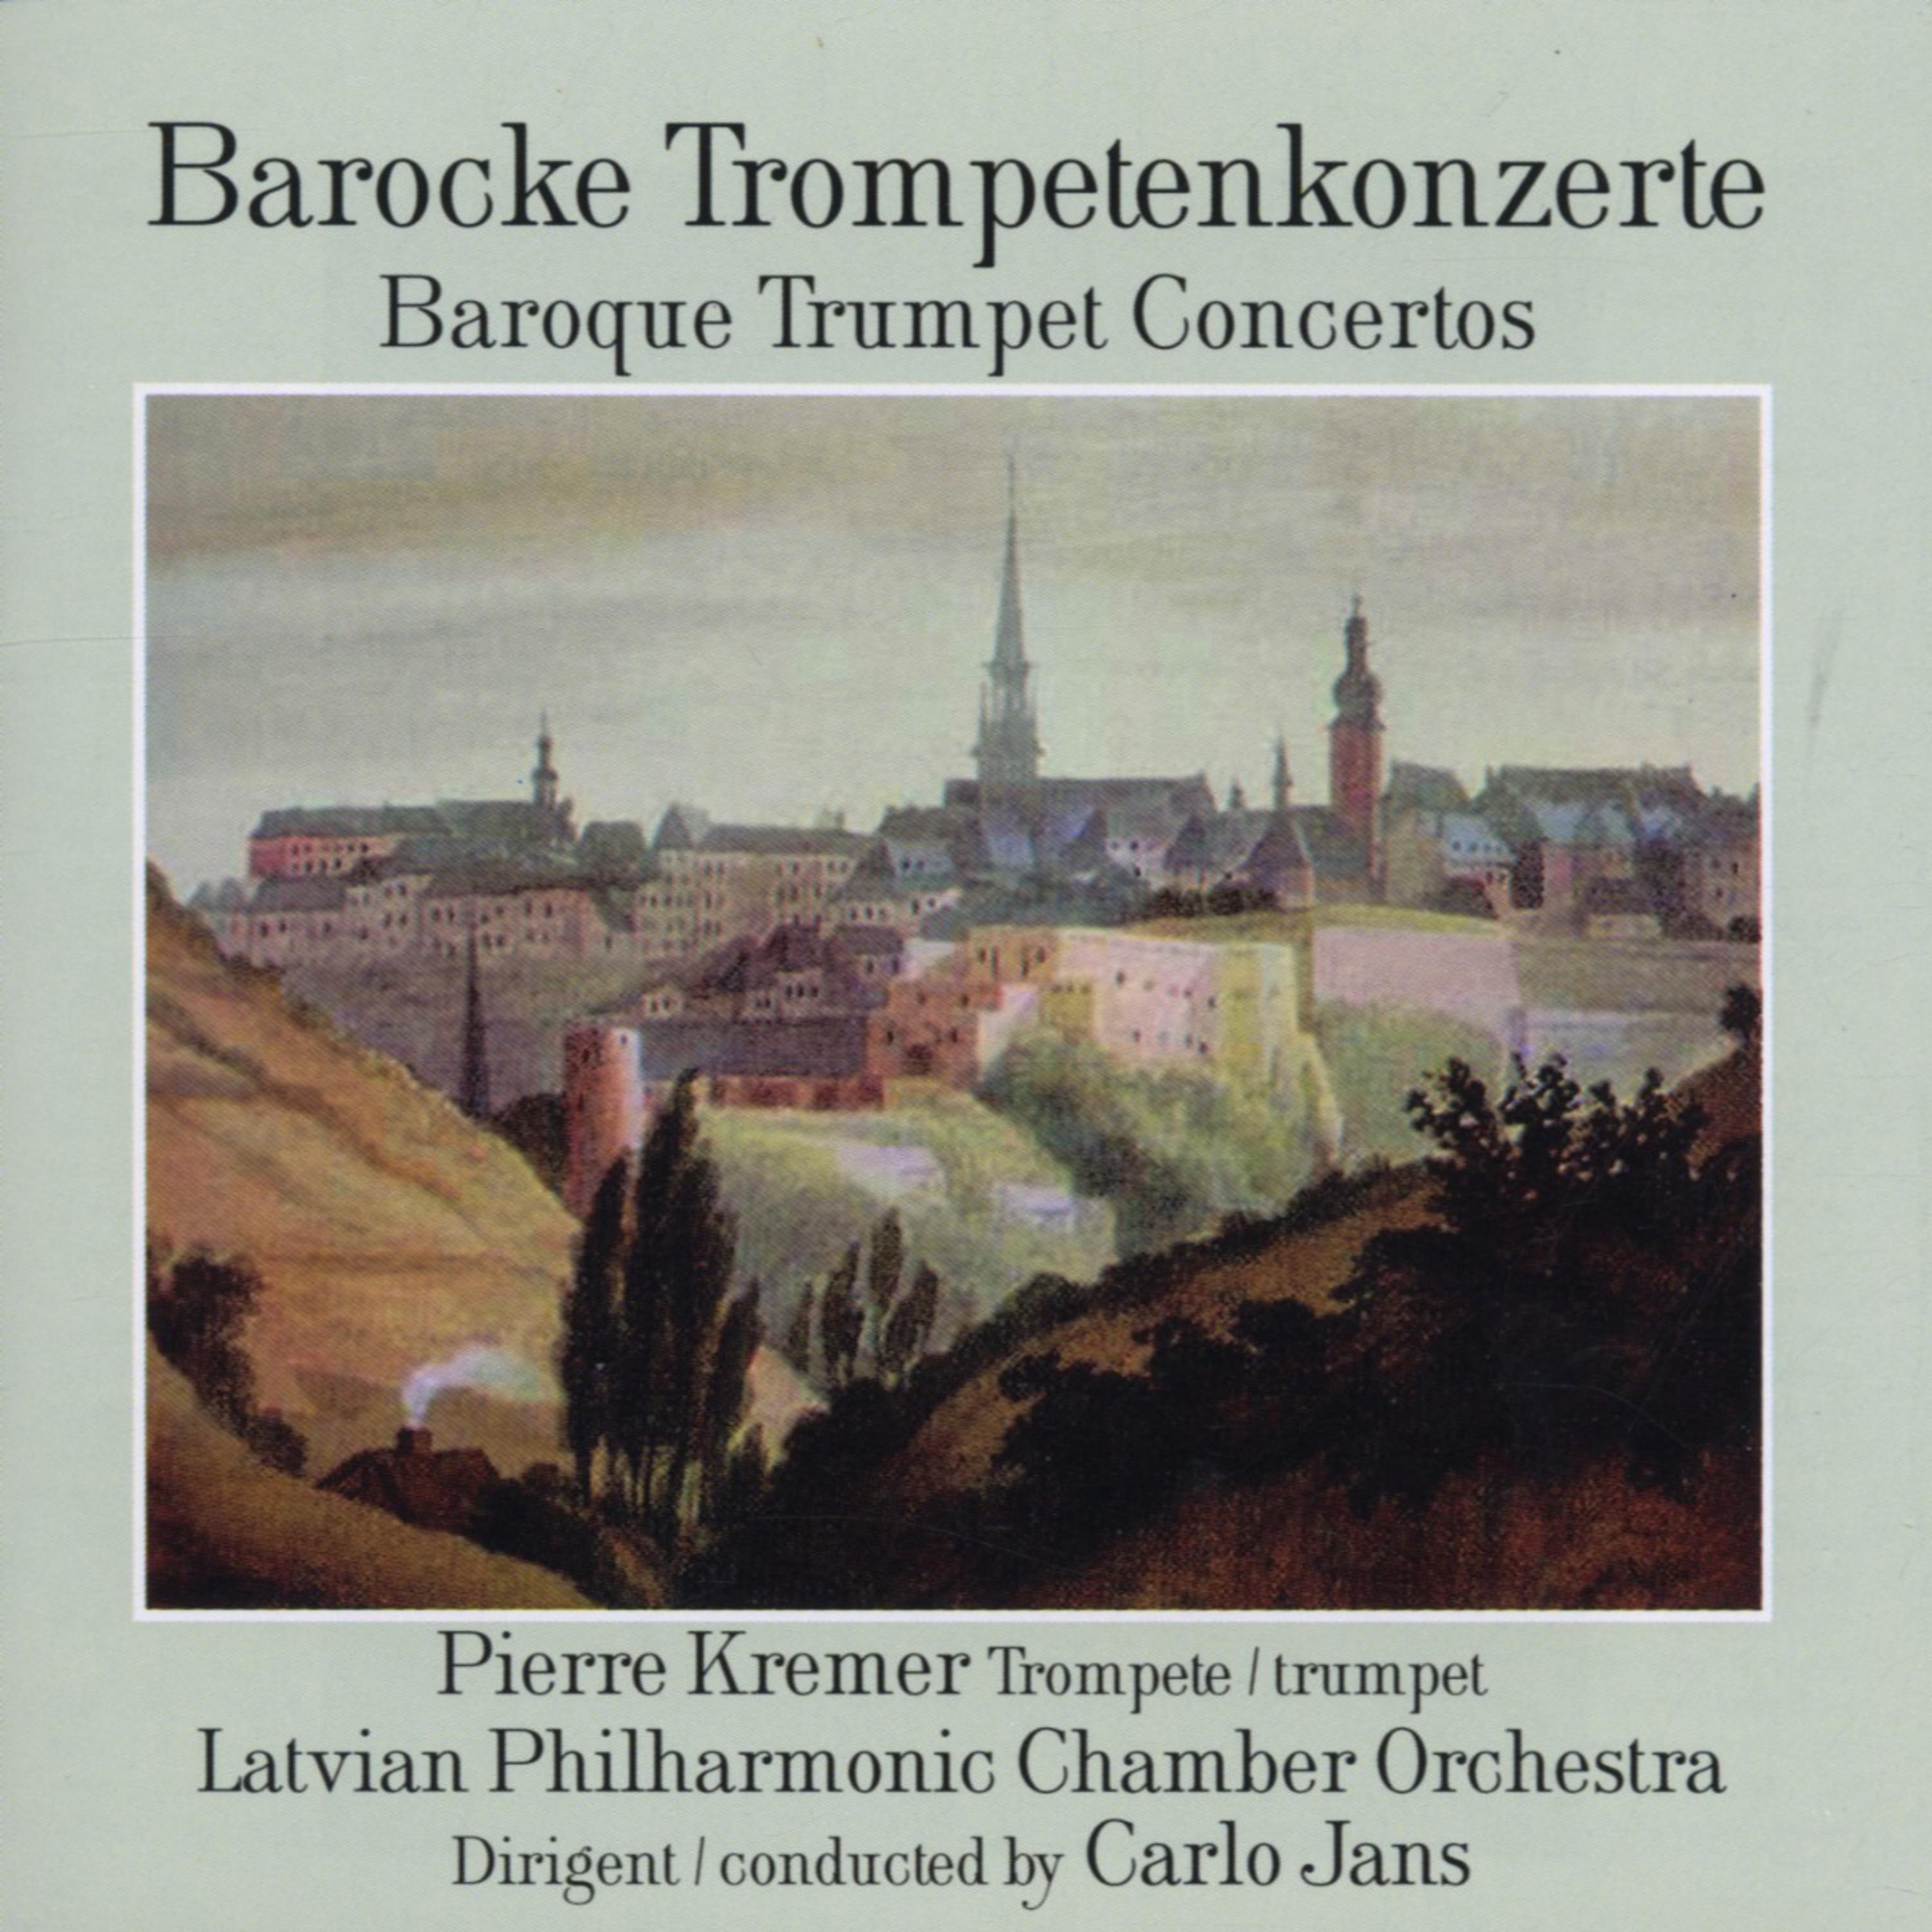 Concerto No. 3 for Orchestra and Trumpet in D Major, Op. 7, No. 6: III. Vivace